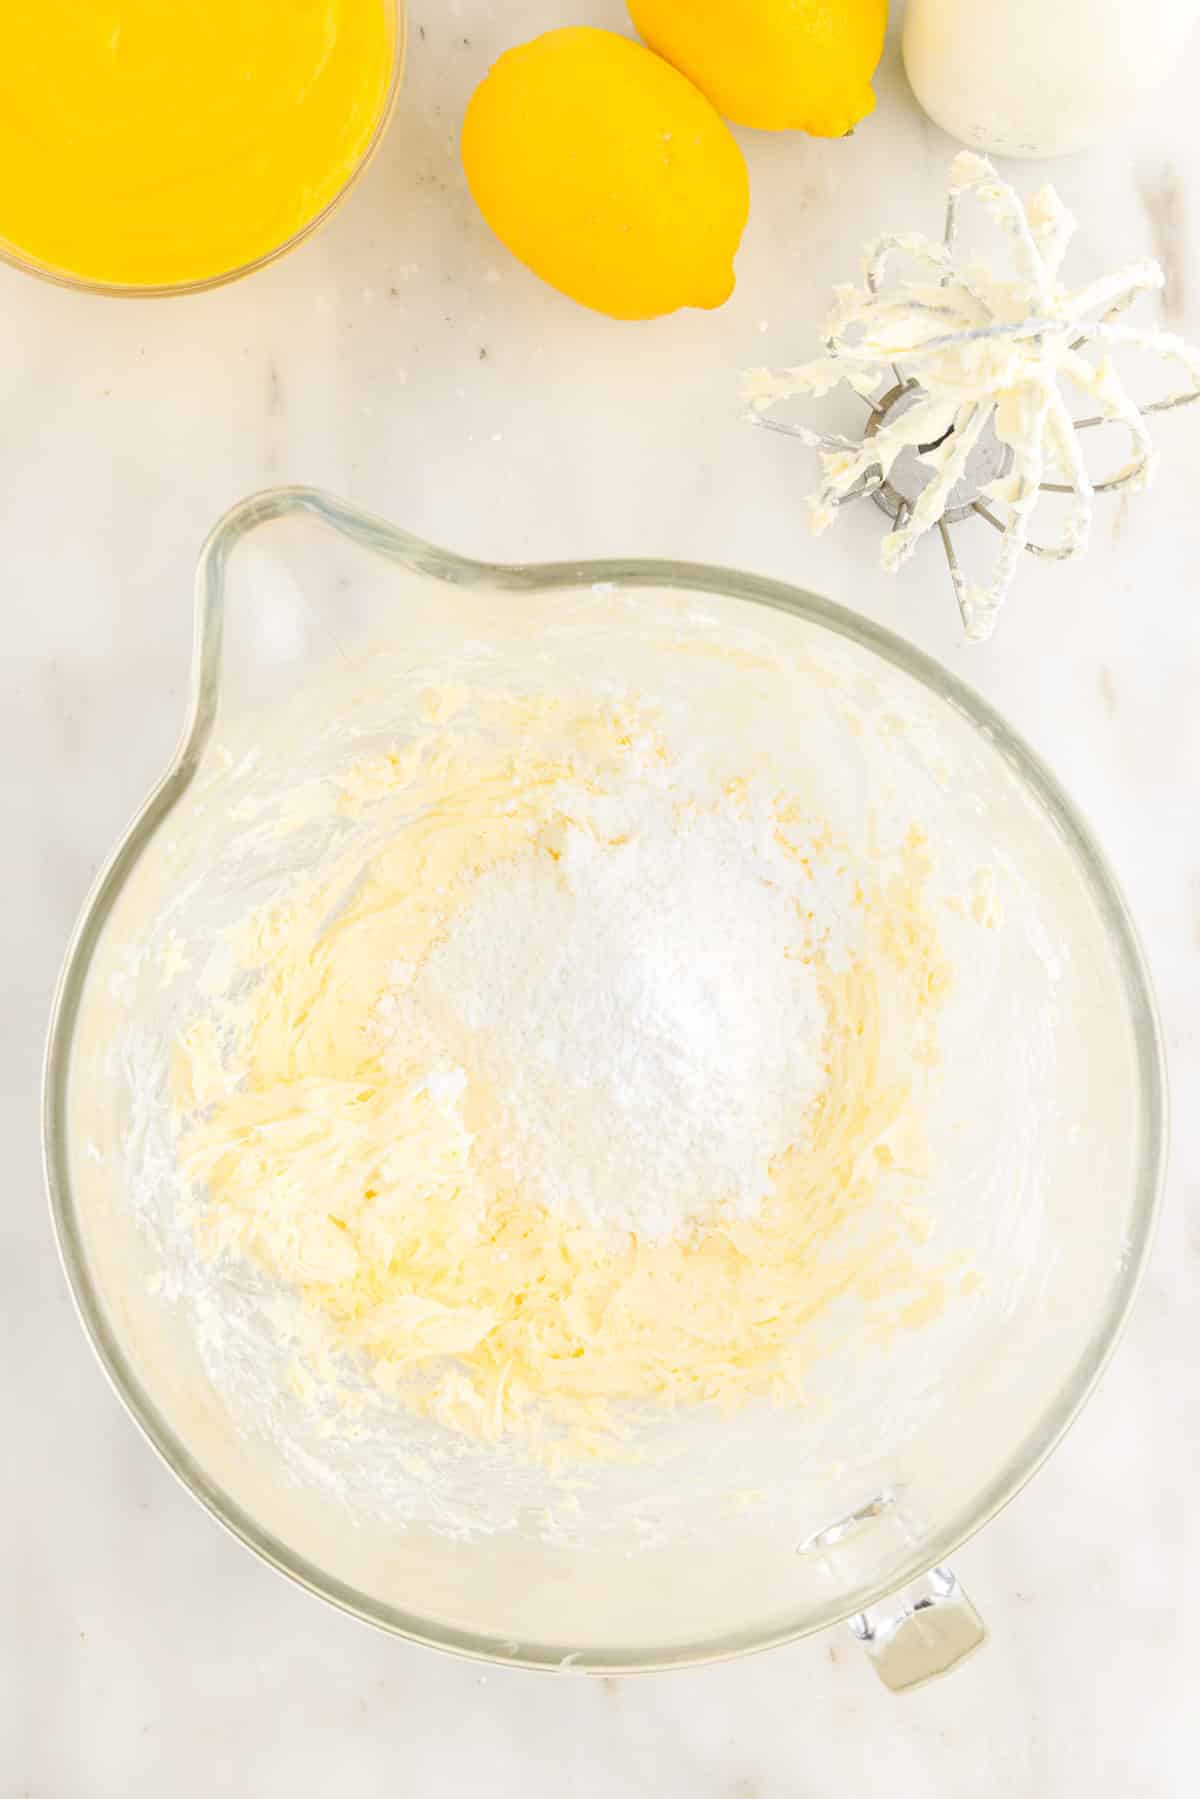 Powdered sugar added to whipped butter.